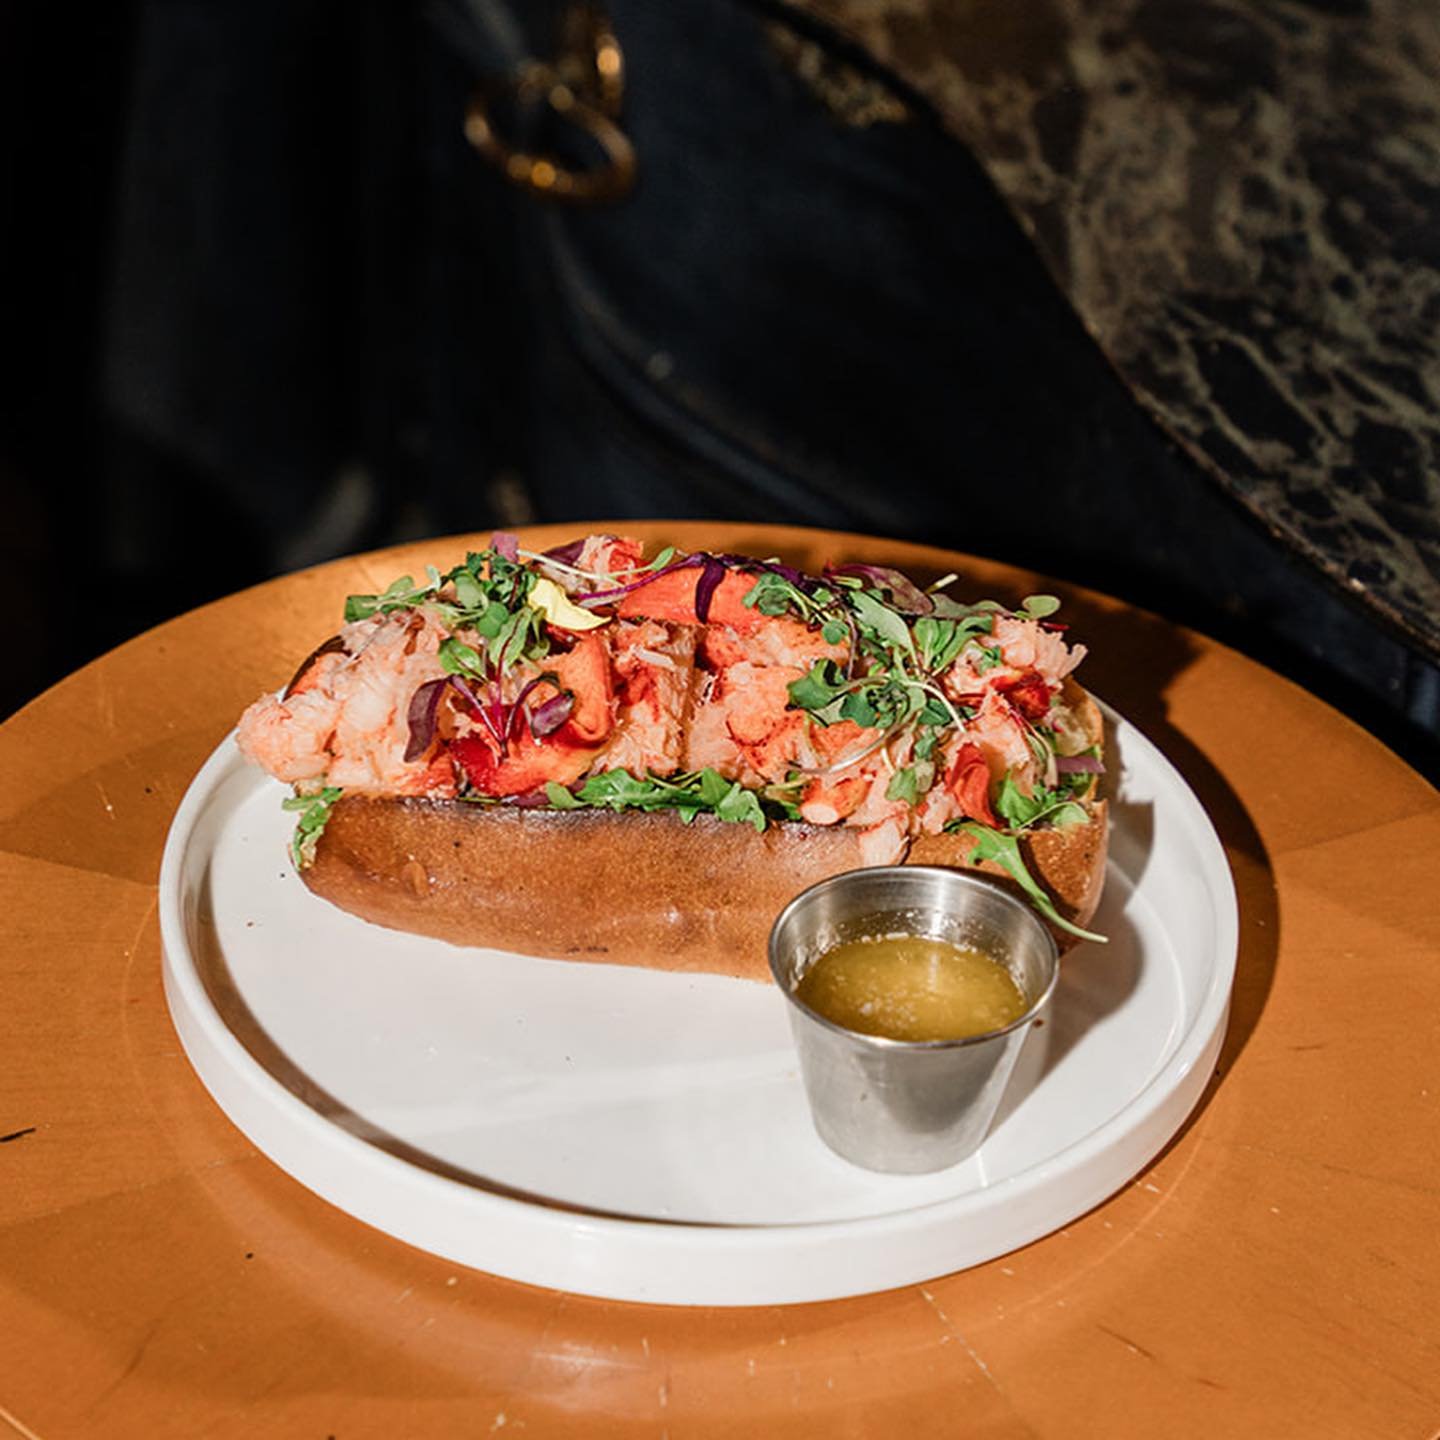 Looking for a bite to eat before or after your night out?

From the small plates menu 🥖🦞
Connecticut Lobster Roll
Brioche, Arugula, Pickled Onion

The Ebenezer is a speakeasy in Michigan located in downtown Plymouth beneath The Ledger. Serving craf